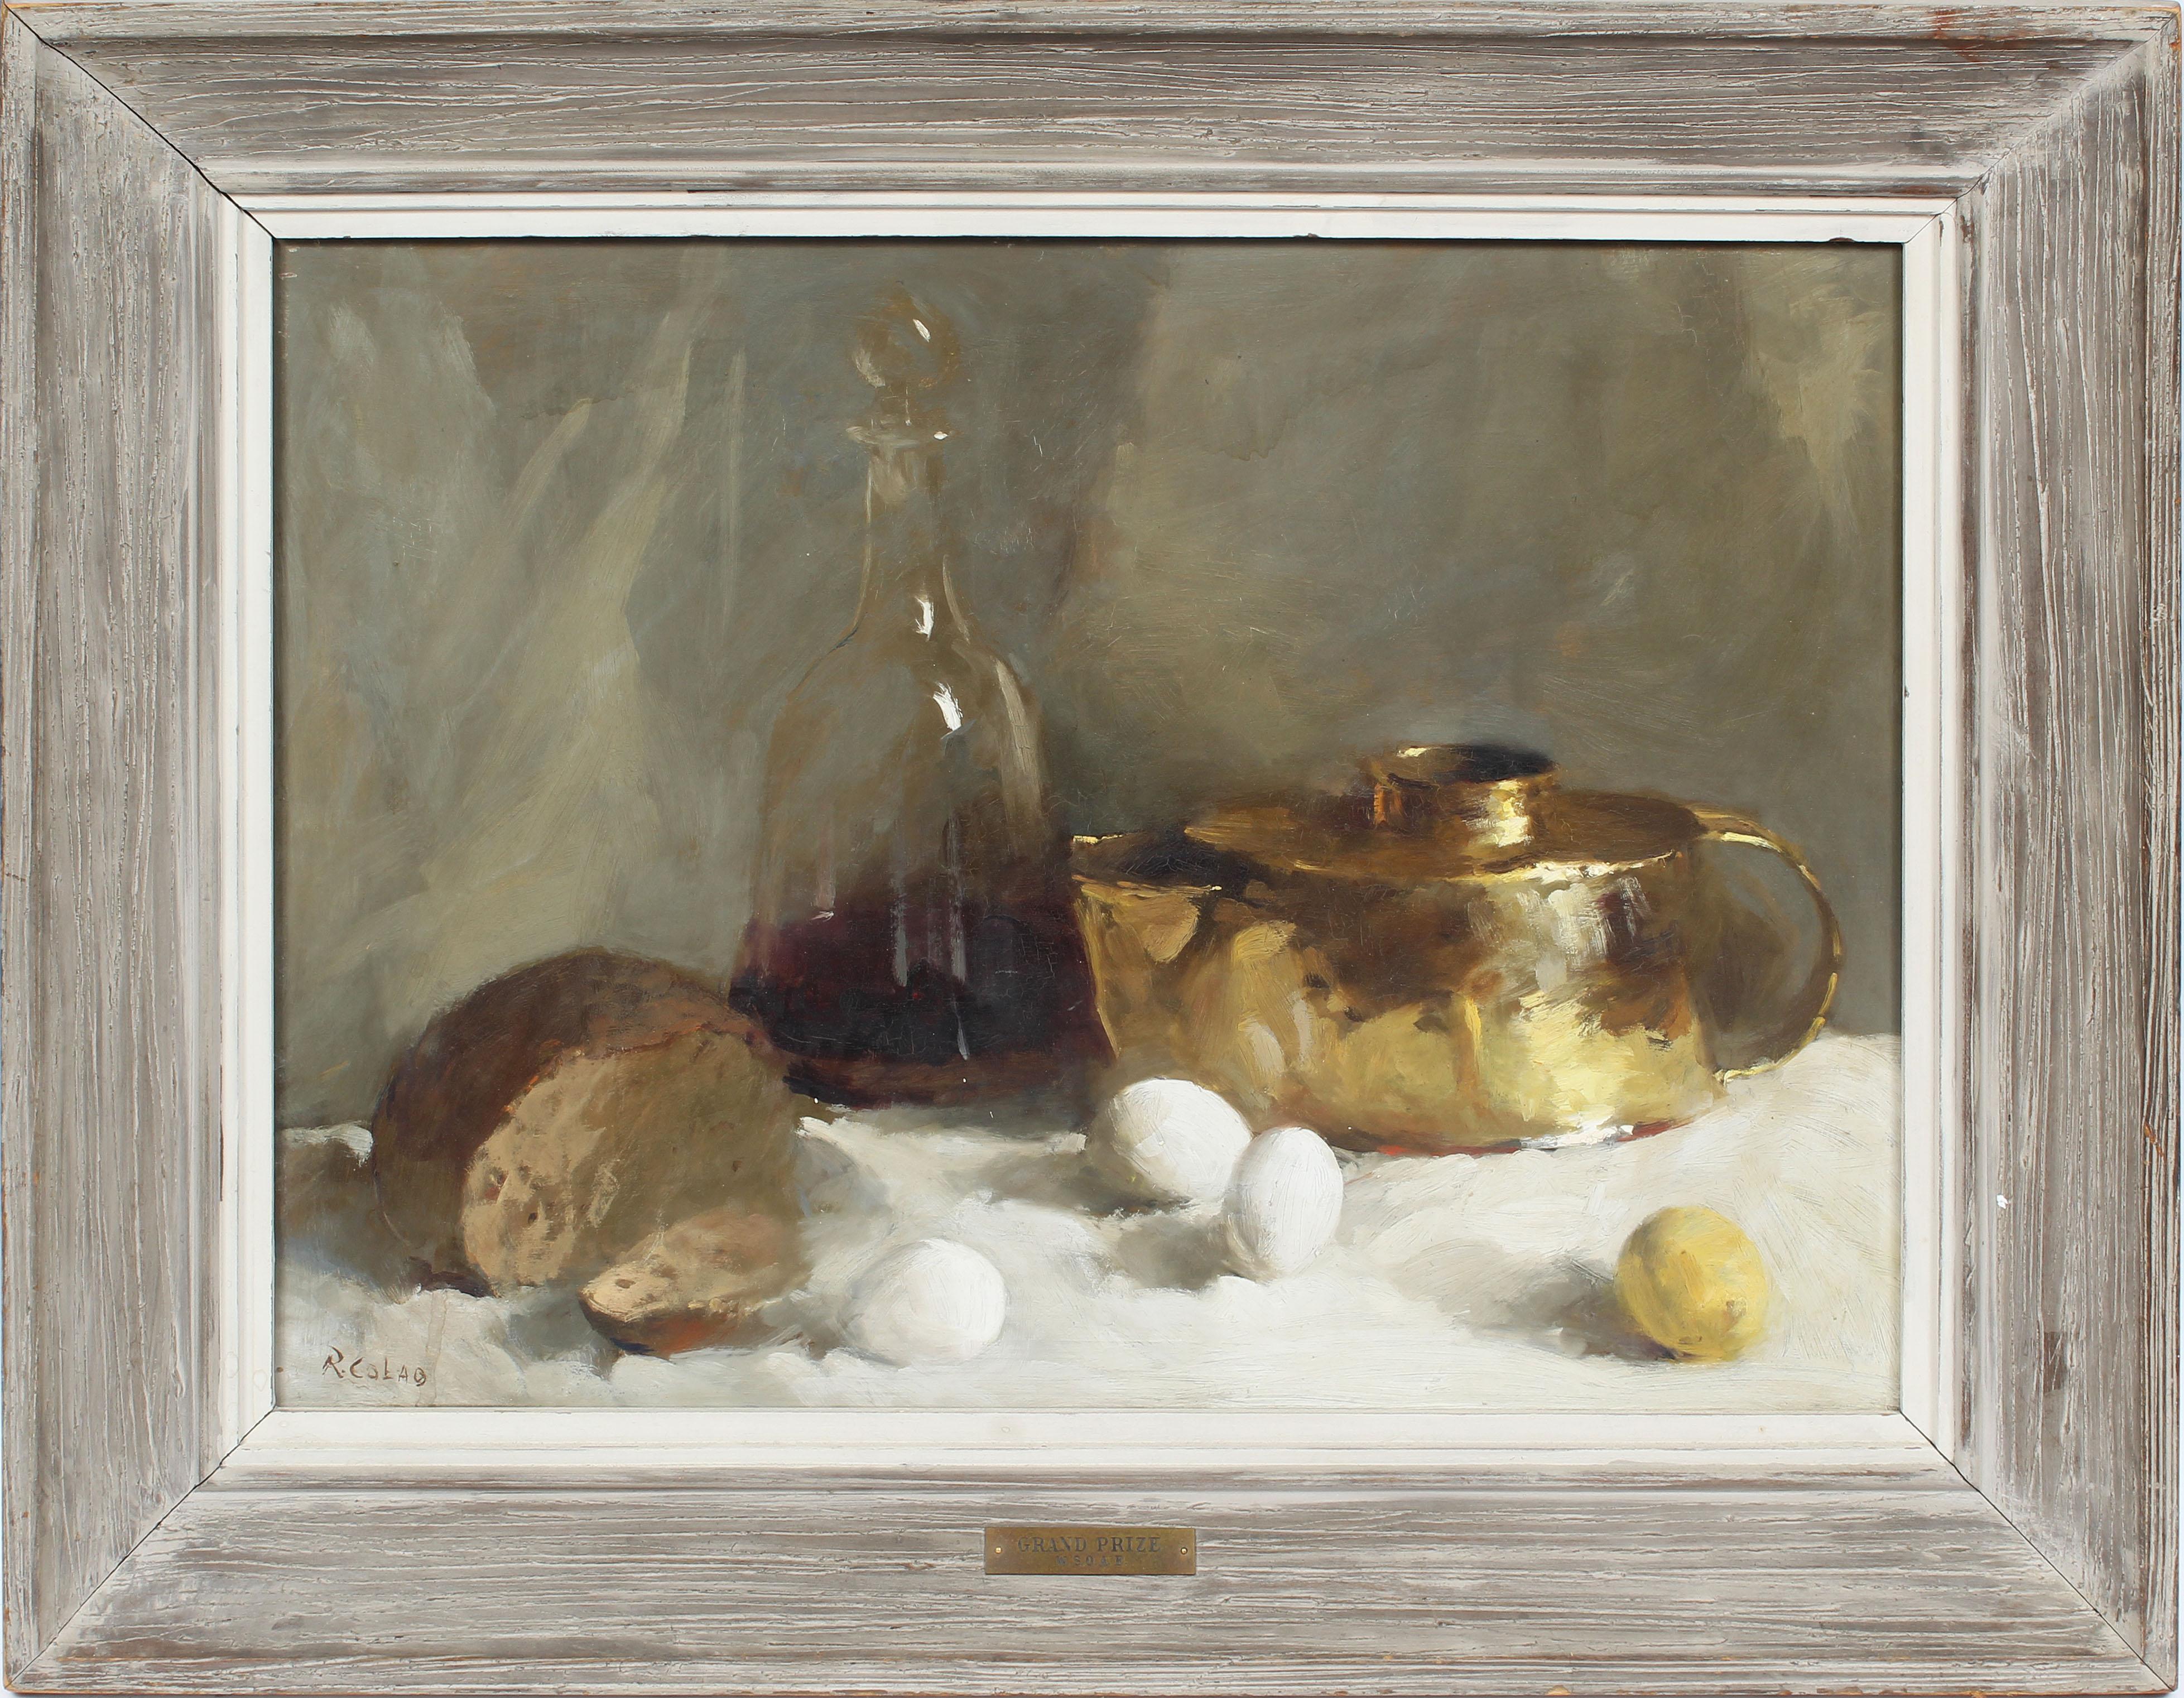 Rudolph Colao (1927 - 2014)  Landscape Painting - Antique American Modernist Exhibited Signed Kitchen Still Life Eggs Wine & Bread